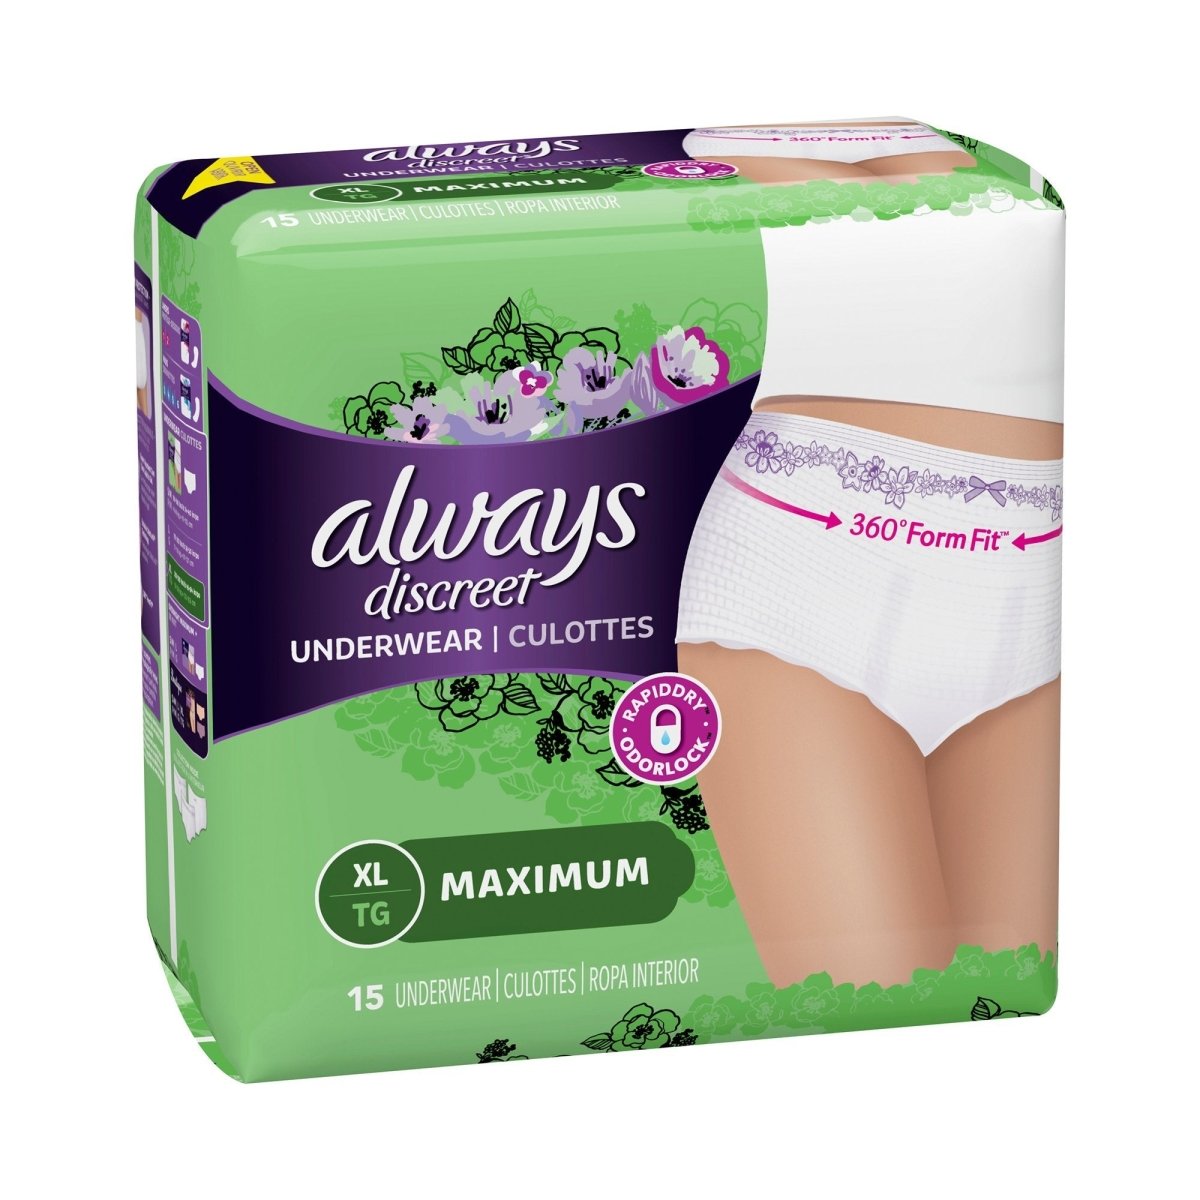 Adult Diapers for Women  Shops Womens Diapers Discreetly Online